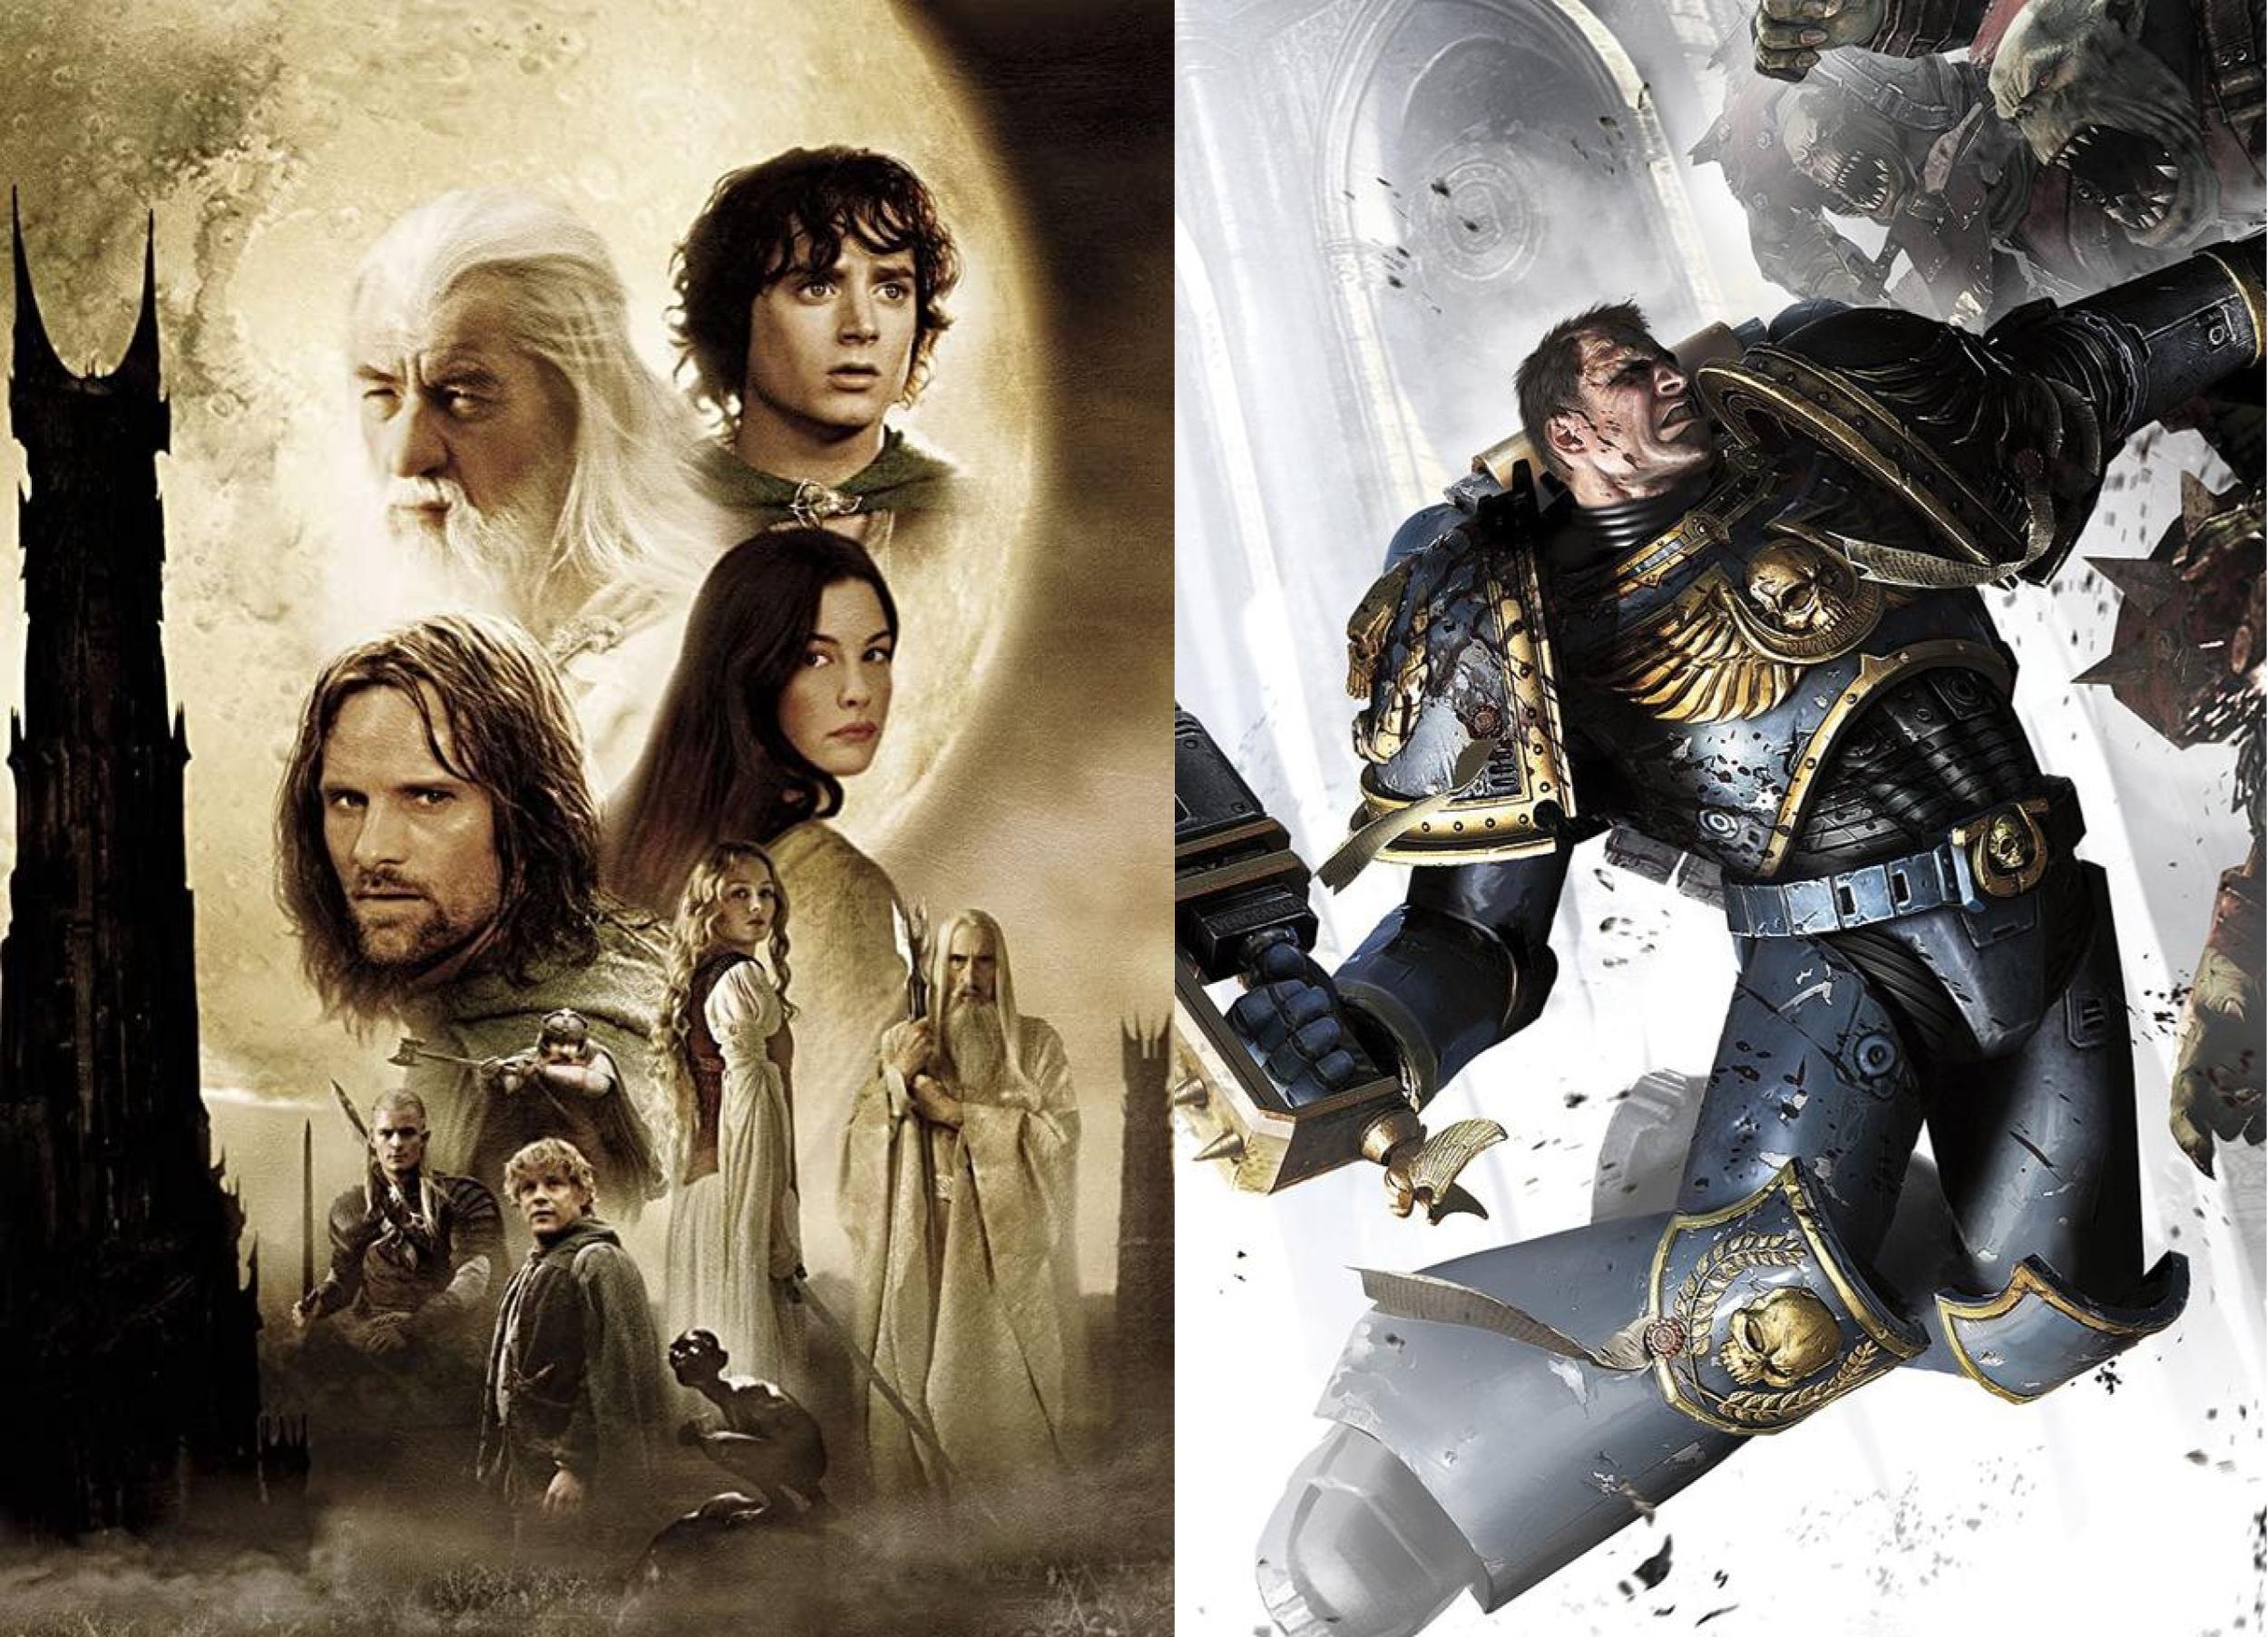 The cast of Lord of the Rings side-by-side with a space marine from Warhammer 40,000. 